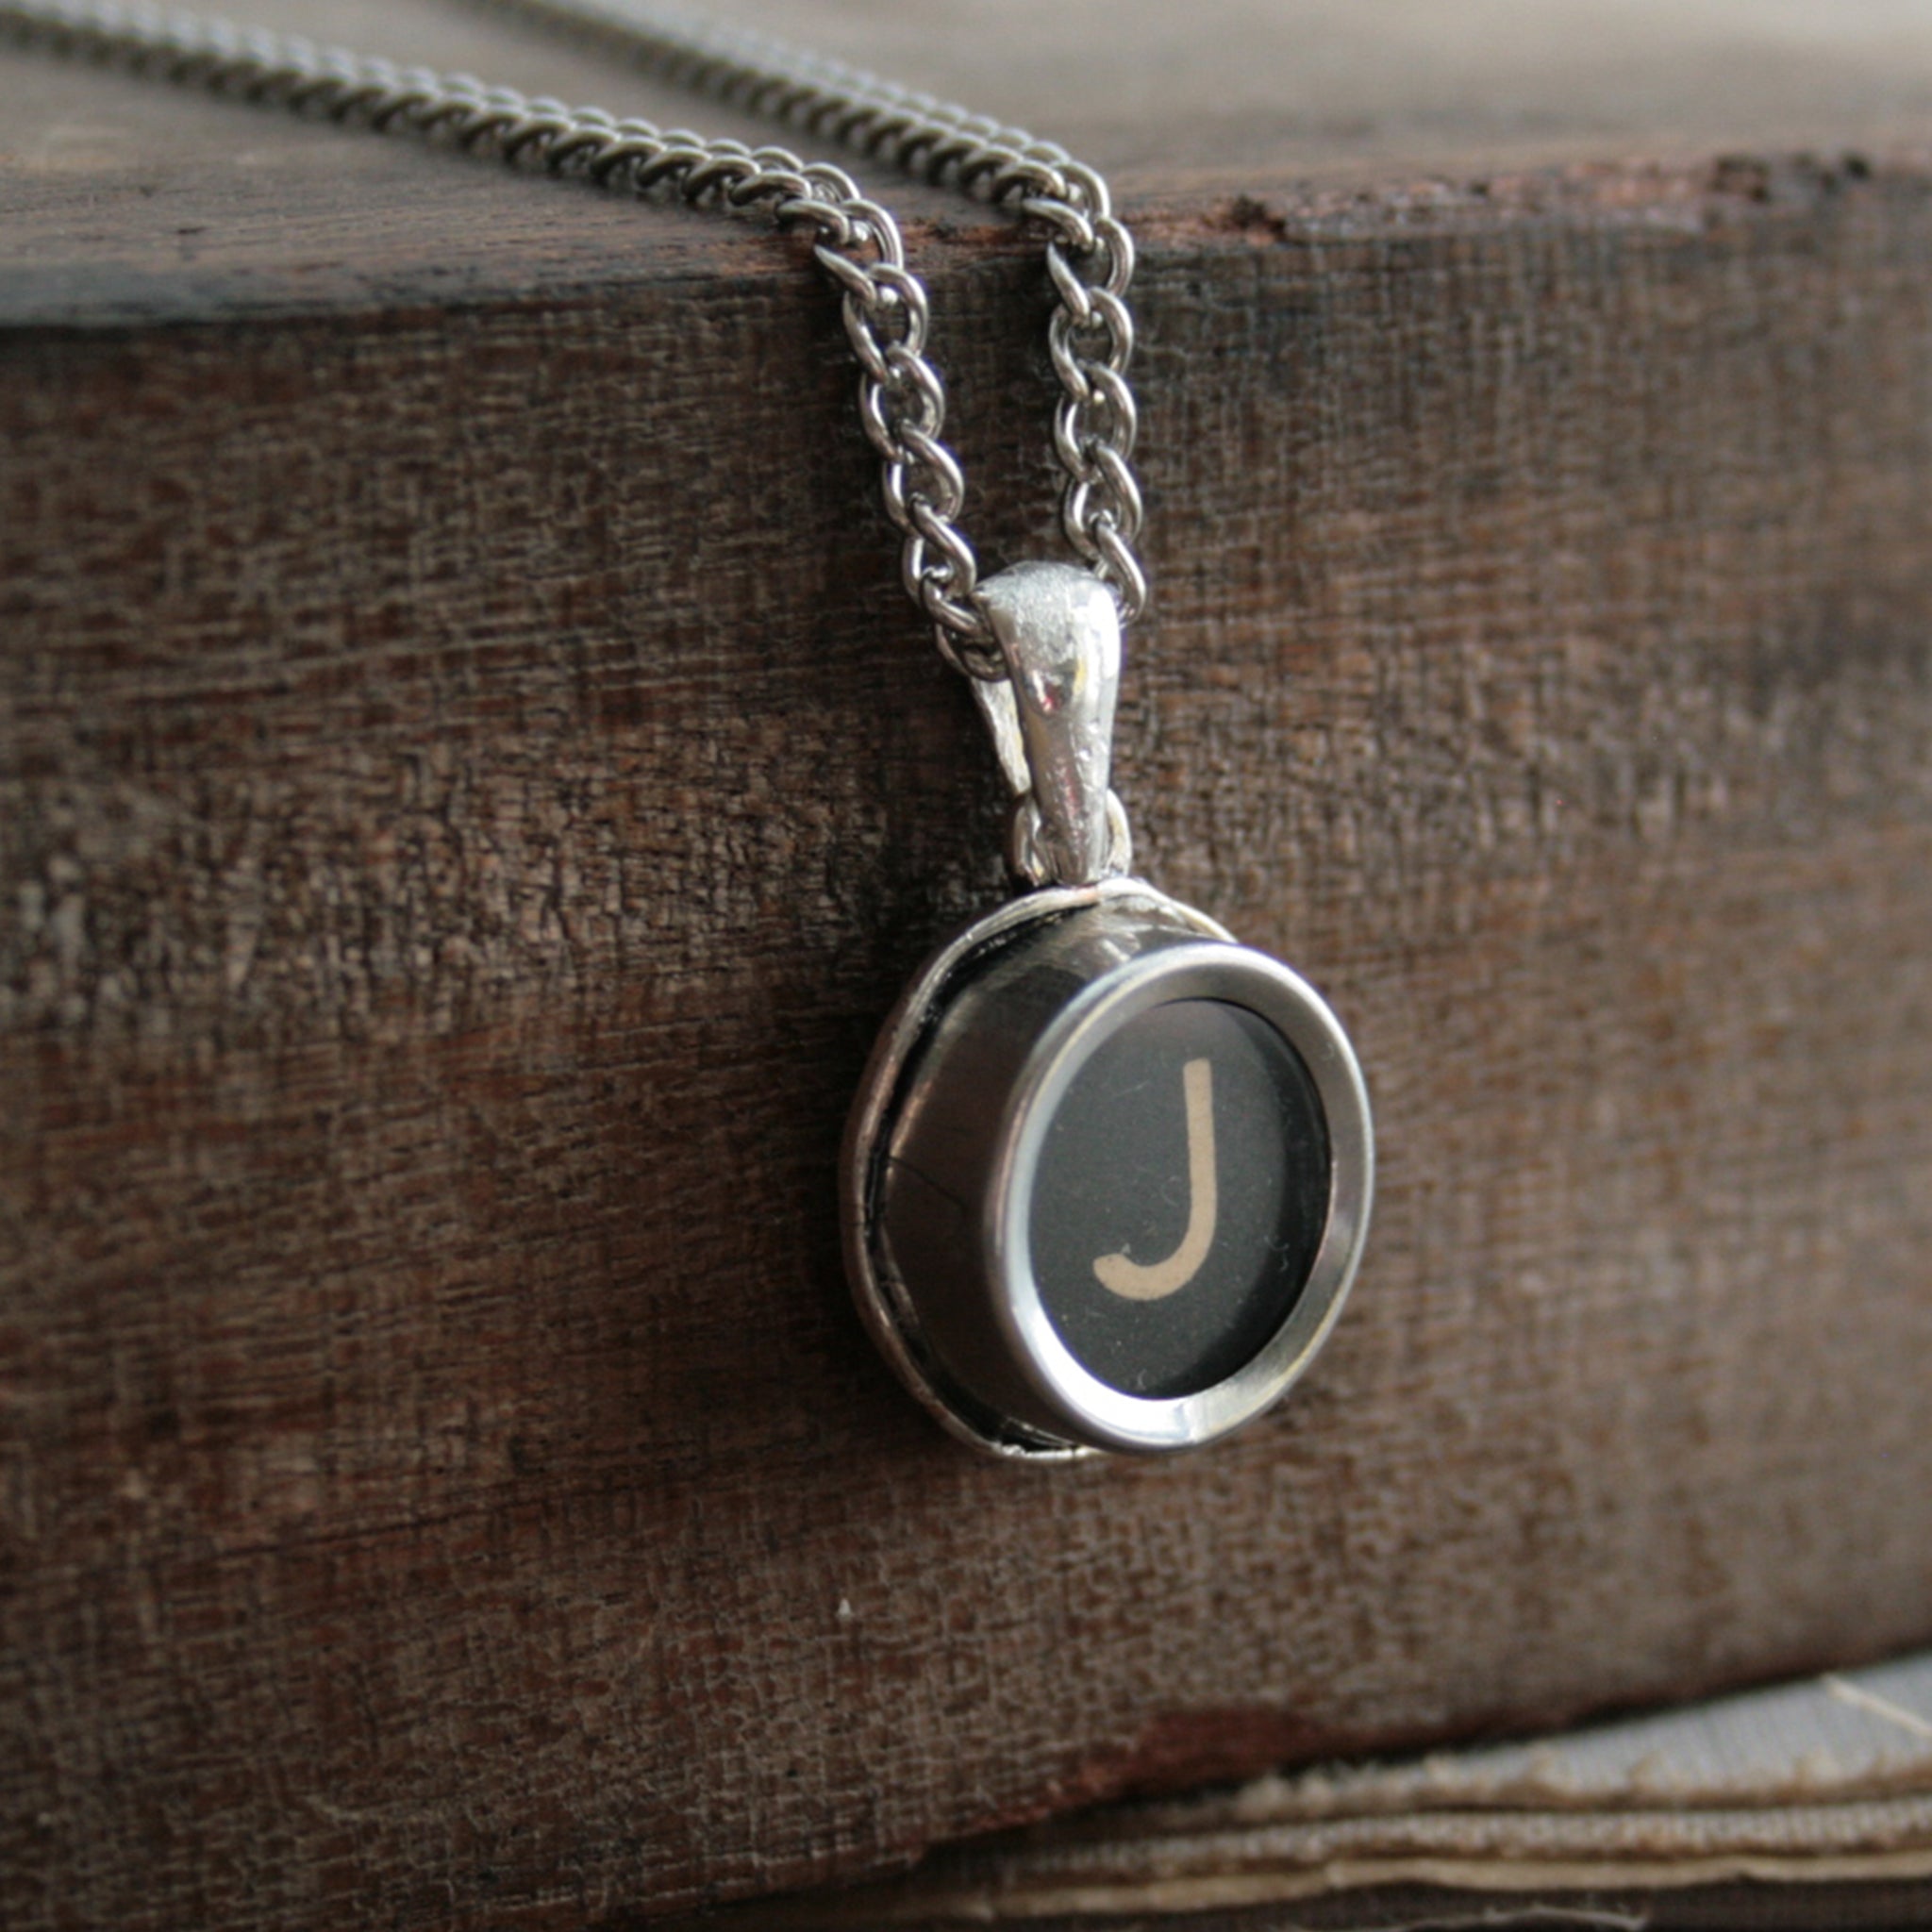 J initial necklace made of authentic vintage black typewriter key